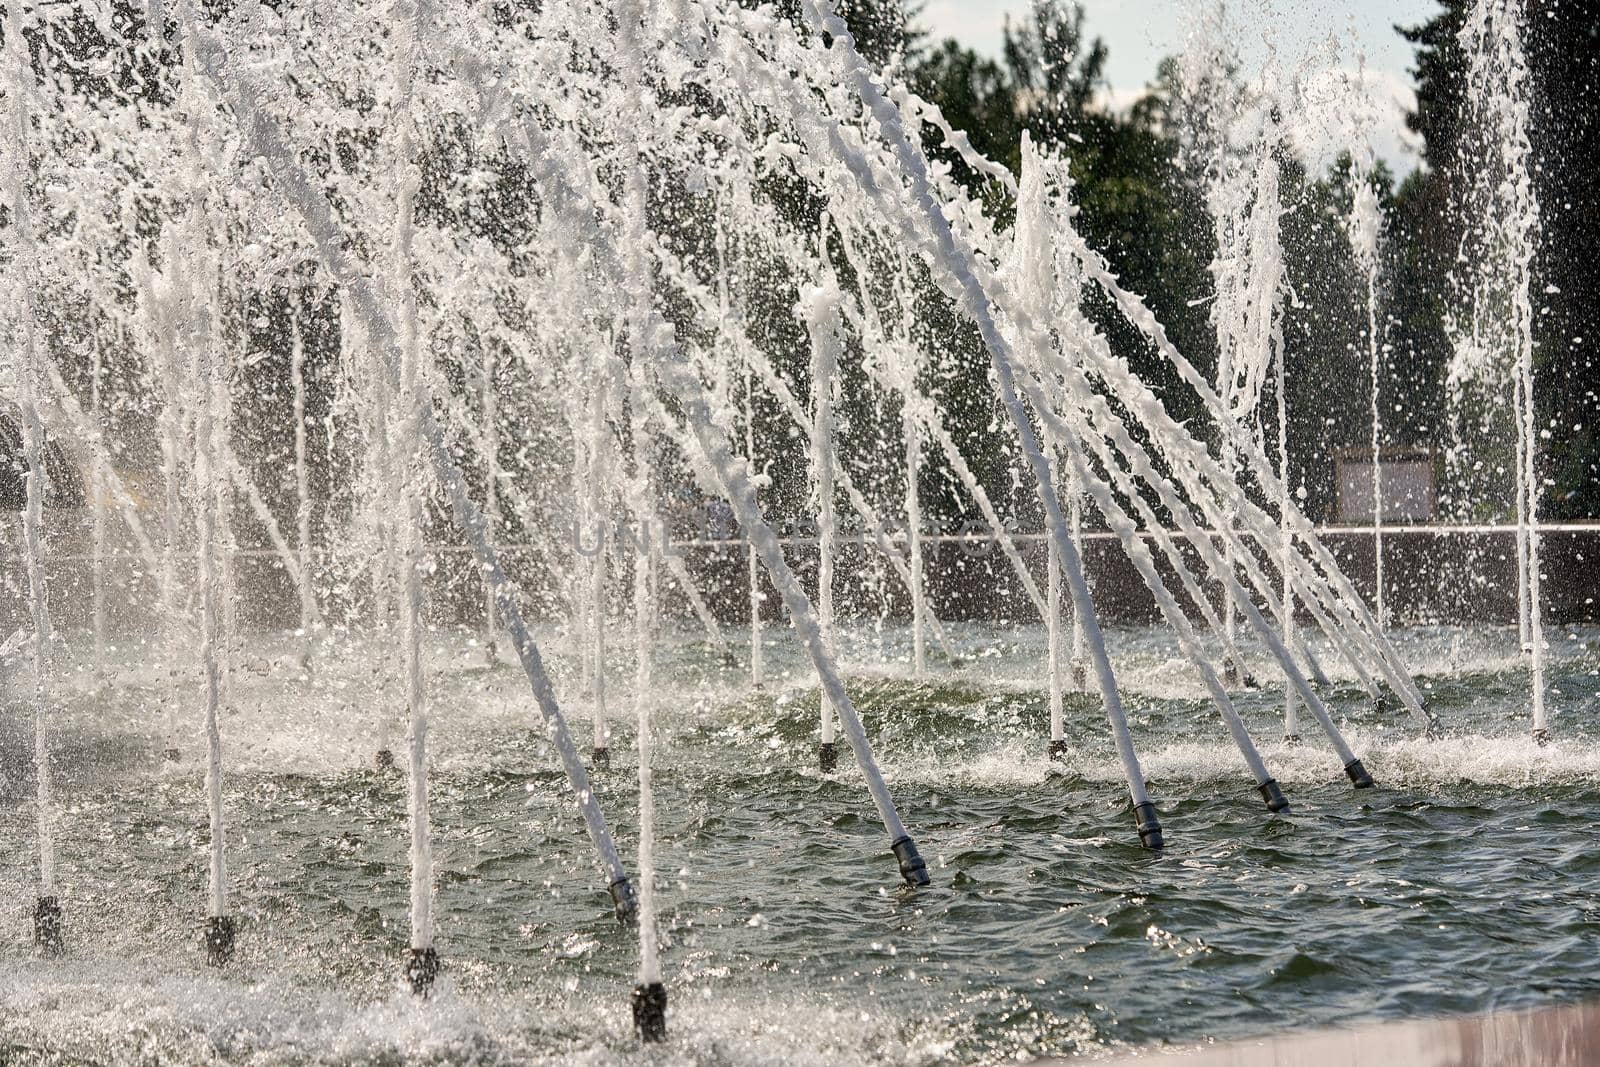 Fragment of a city fountain with water jets and splashes. Water fountain